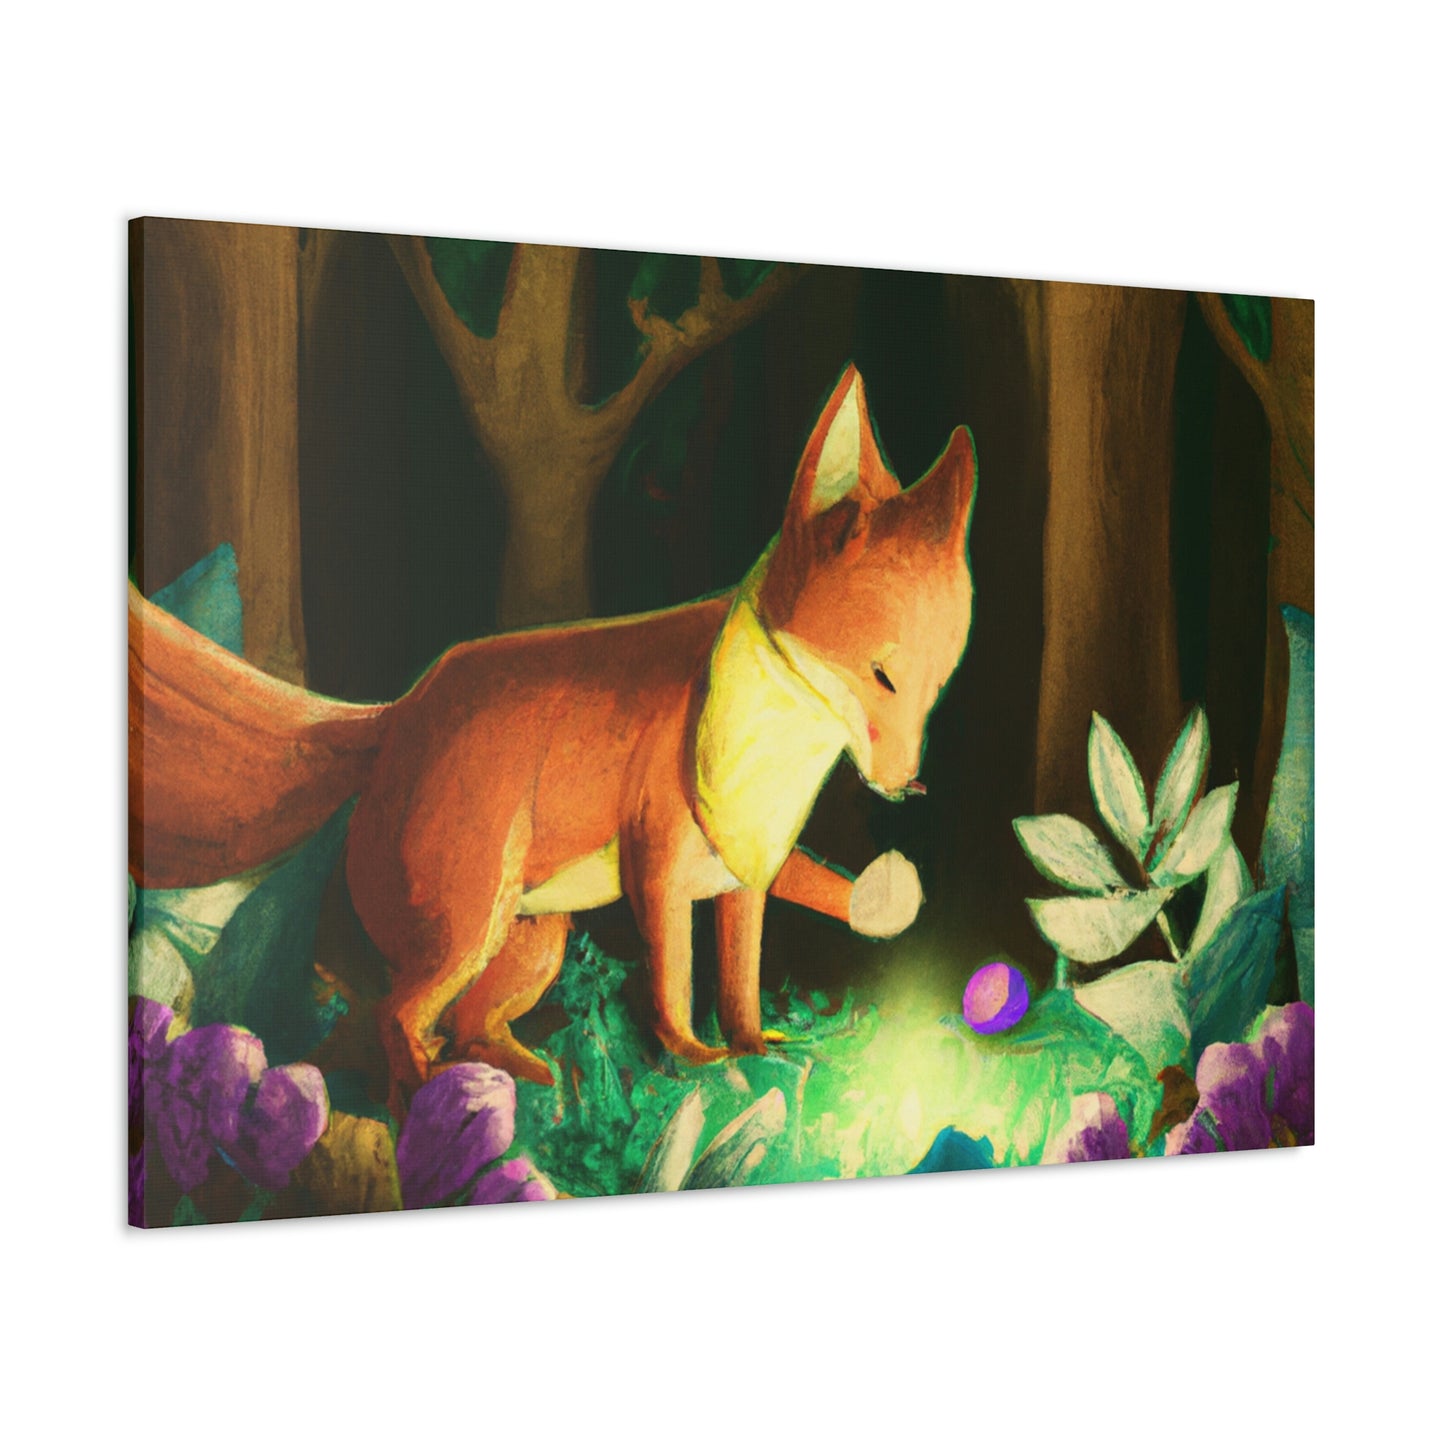 "The Gem-Seeking Fox in the Enchanted Forest" - The Alien Canva